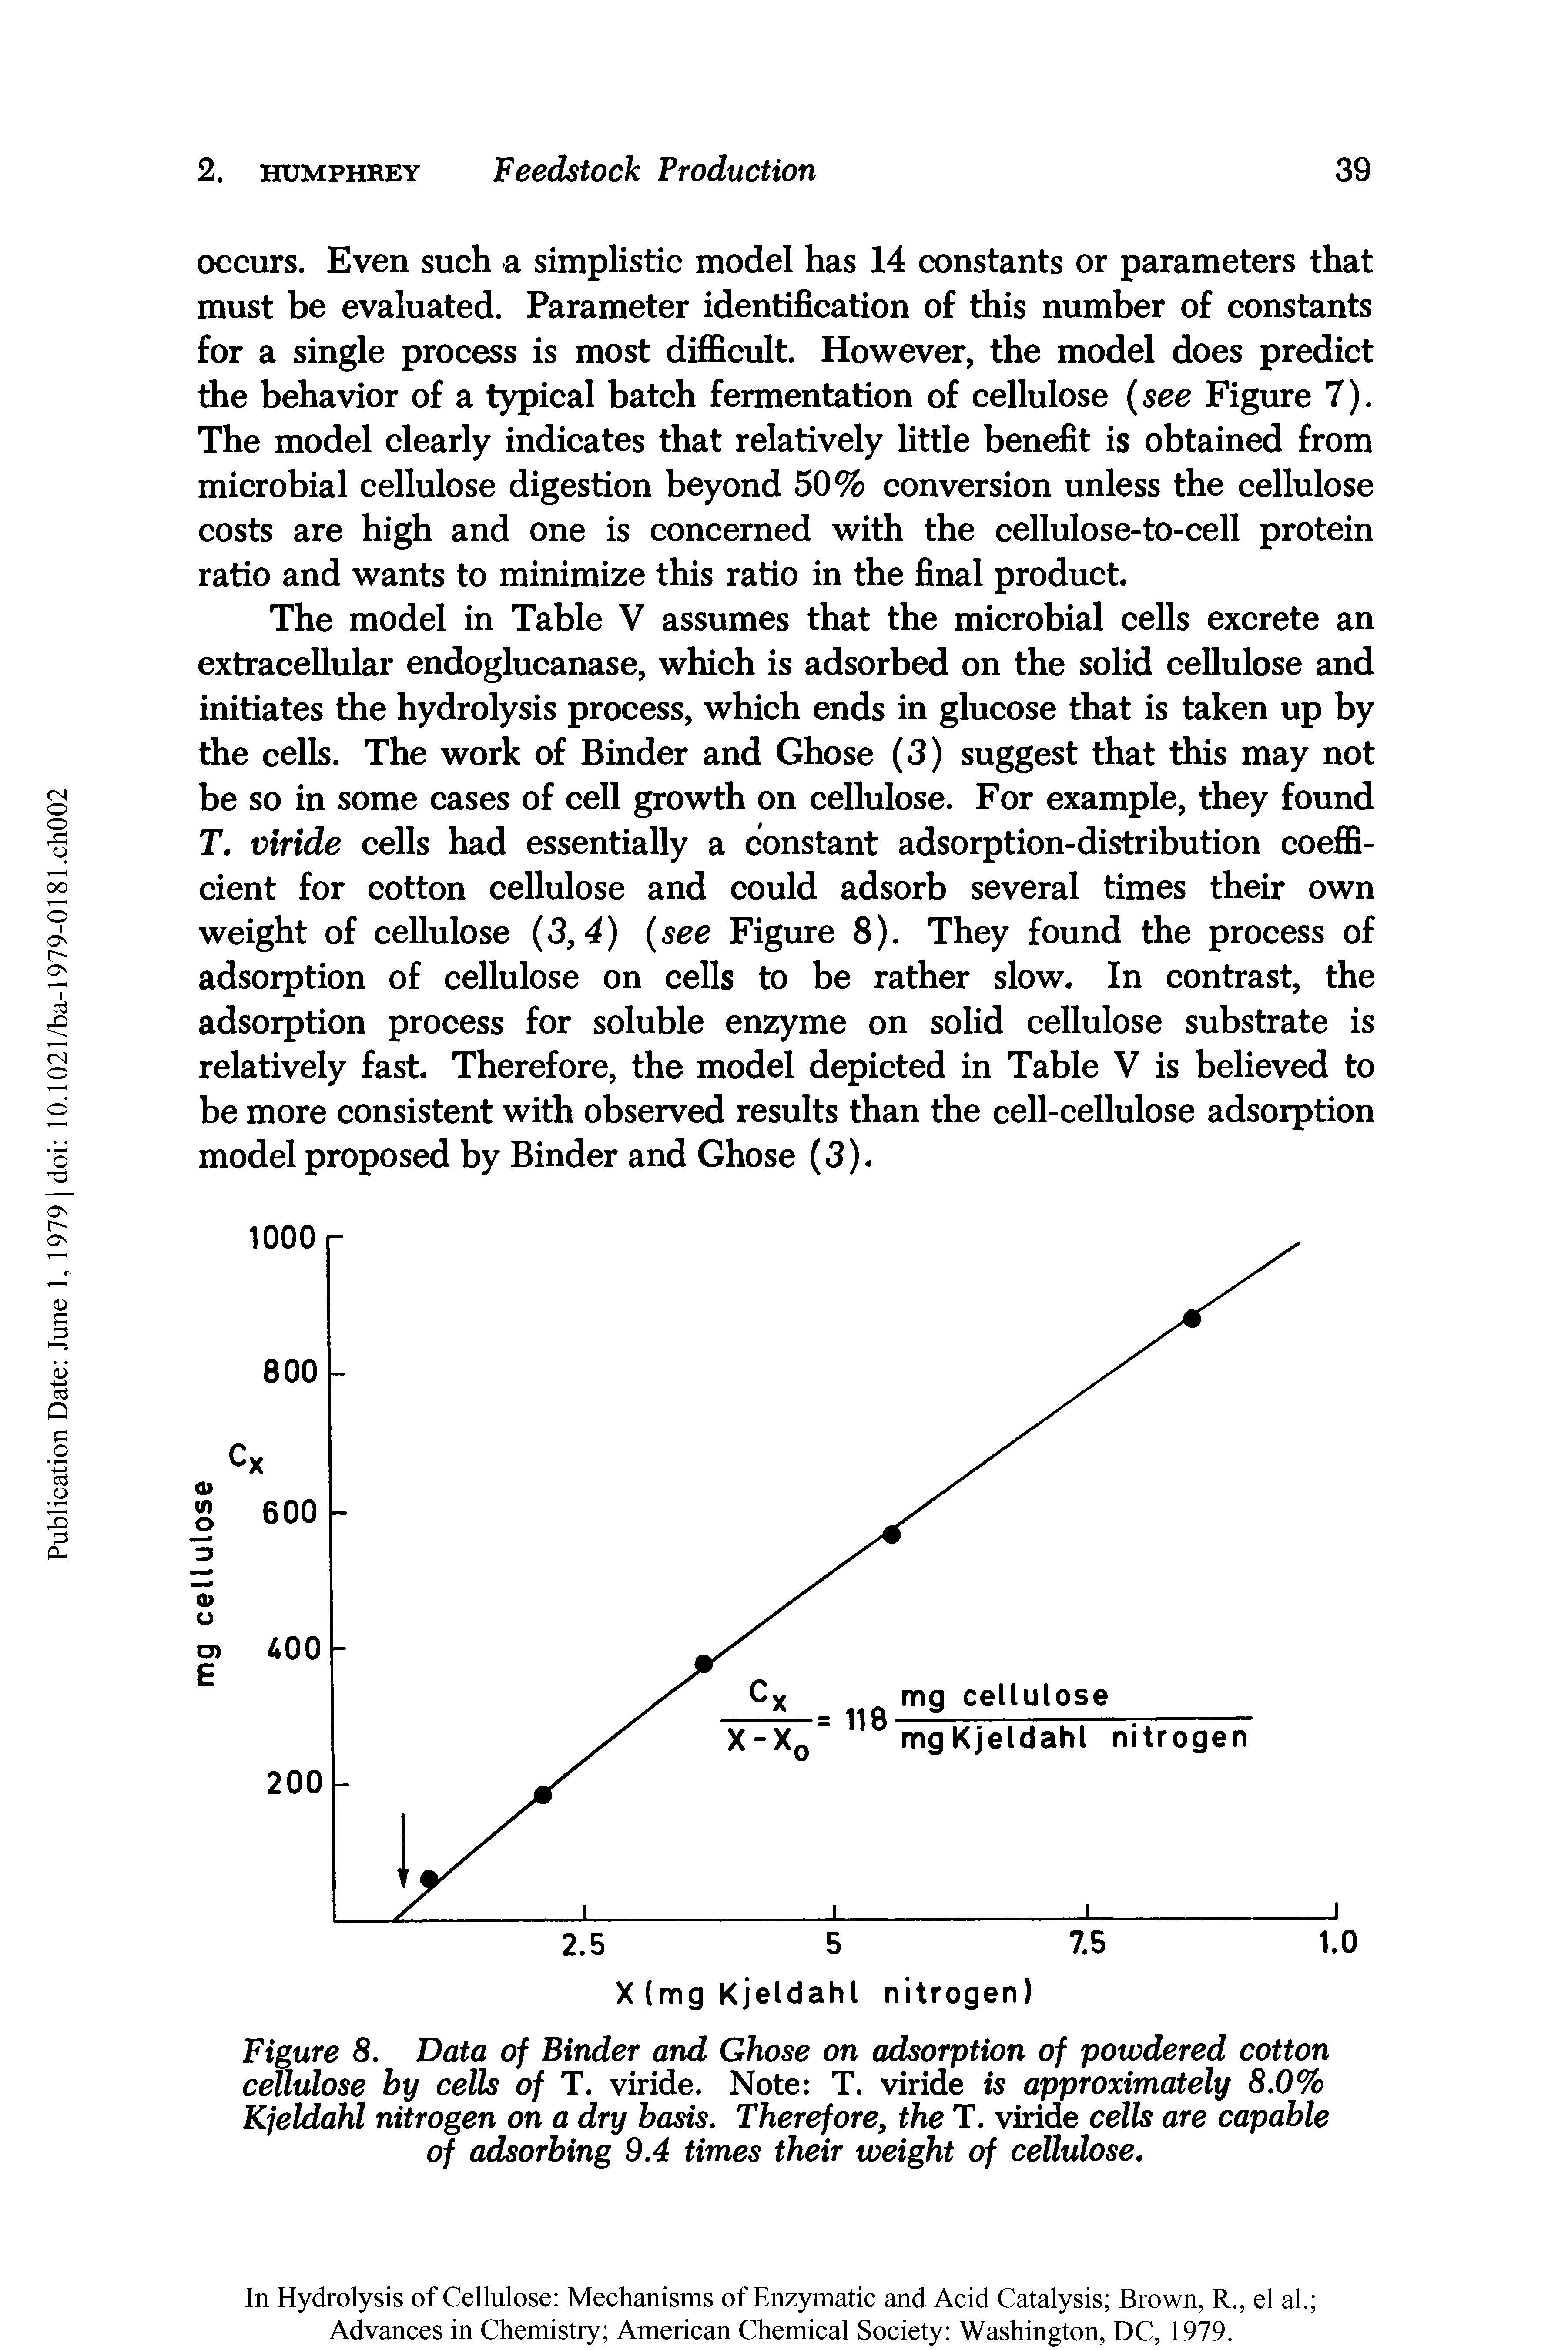 Figure 8. Data of Binder and Ghose on adsorption of powdered cotton cellulose by cells of T. viride. Note T. viride is approximately 8.0% Kjeldahl nitrogen on a dry basis. Therefore, the T. viride cells are capable of adsorbing 9.4 times their weight of cellulose.